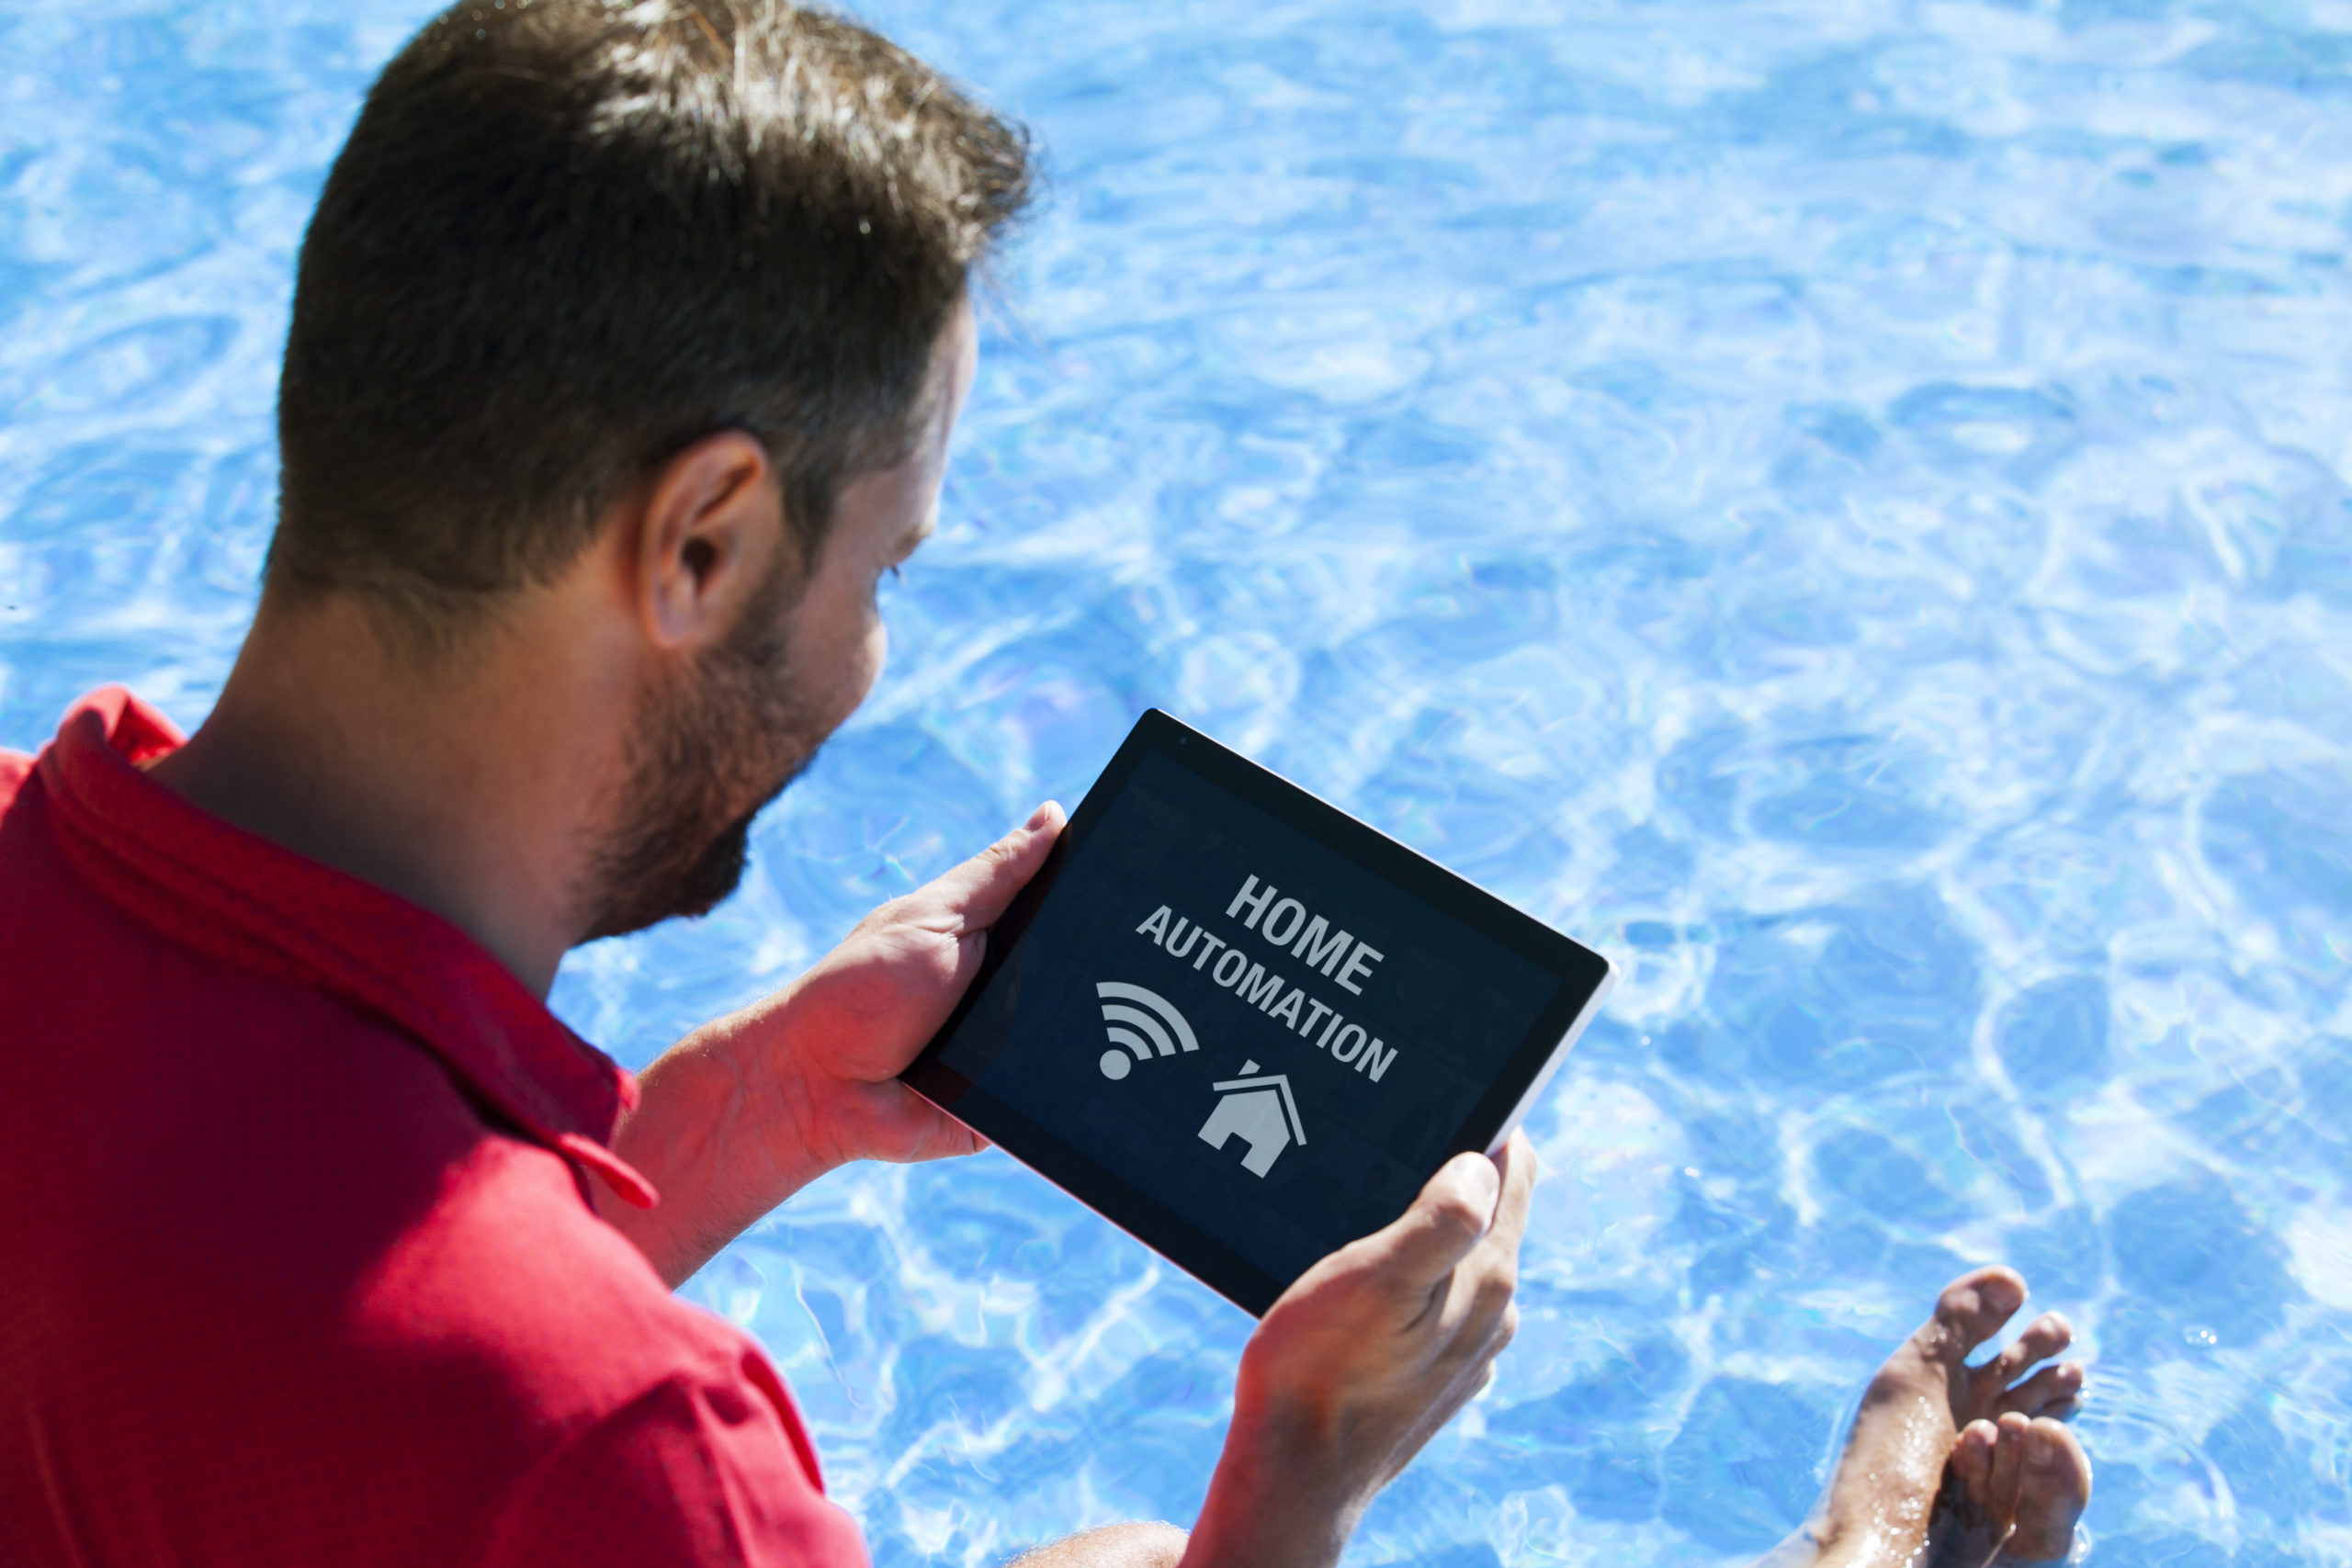 A man holding a pool automation gadget or control device, which allows for the remote management and automation of various pool functions and features.